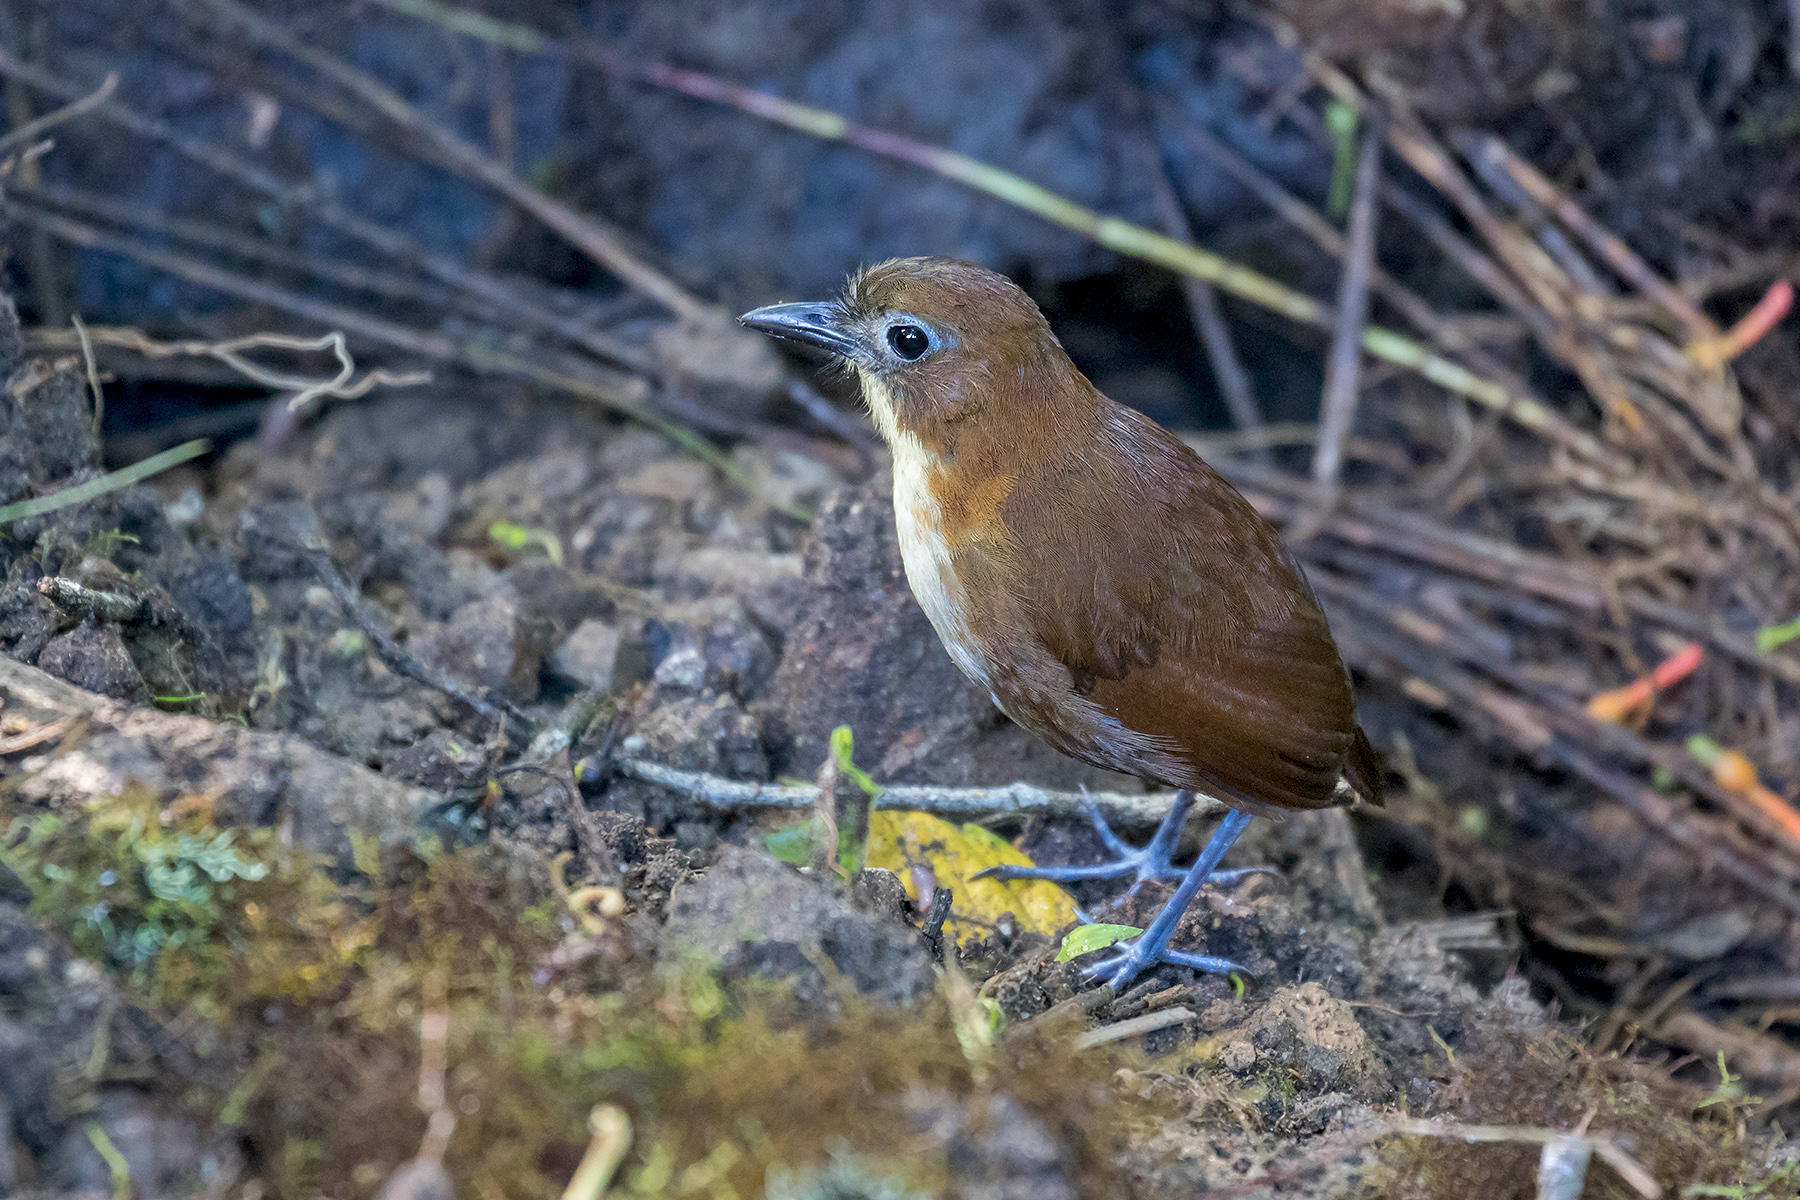 Yellow-breasted Antpitta in Ecuador (image by Pete Morris)